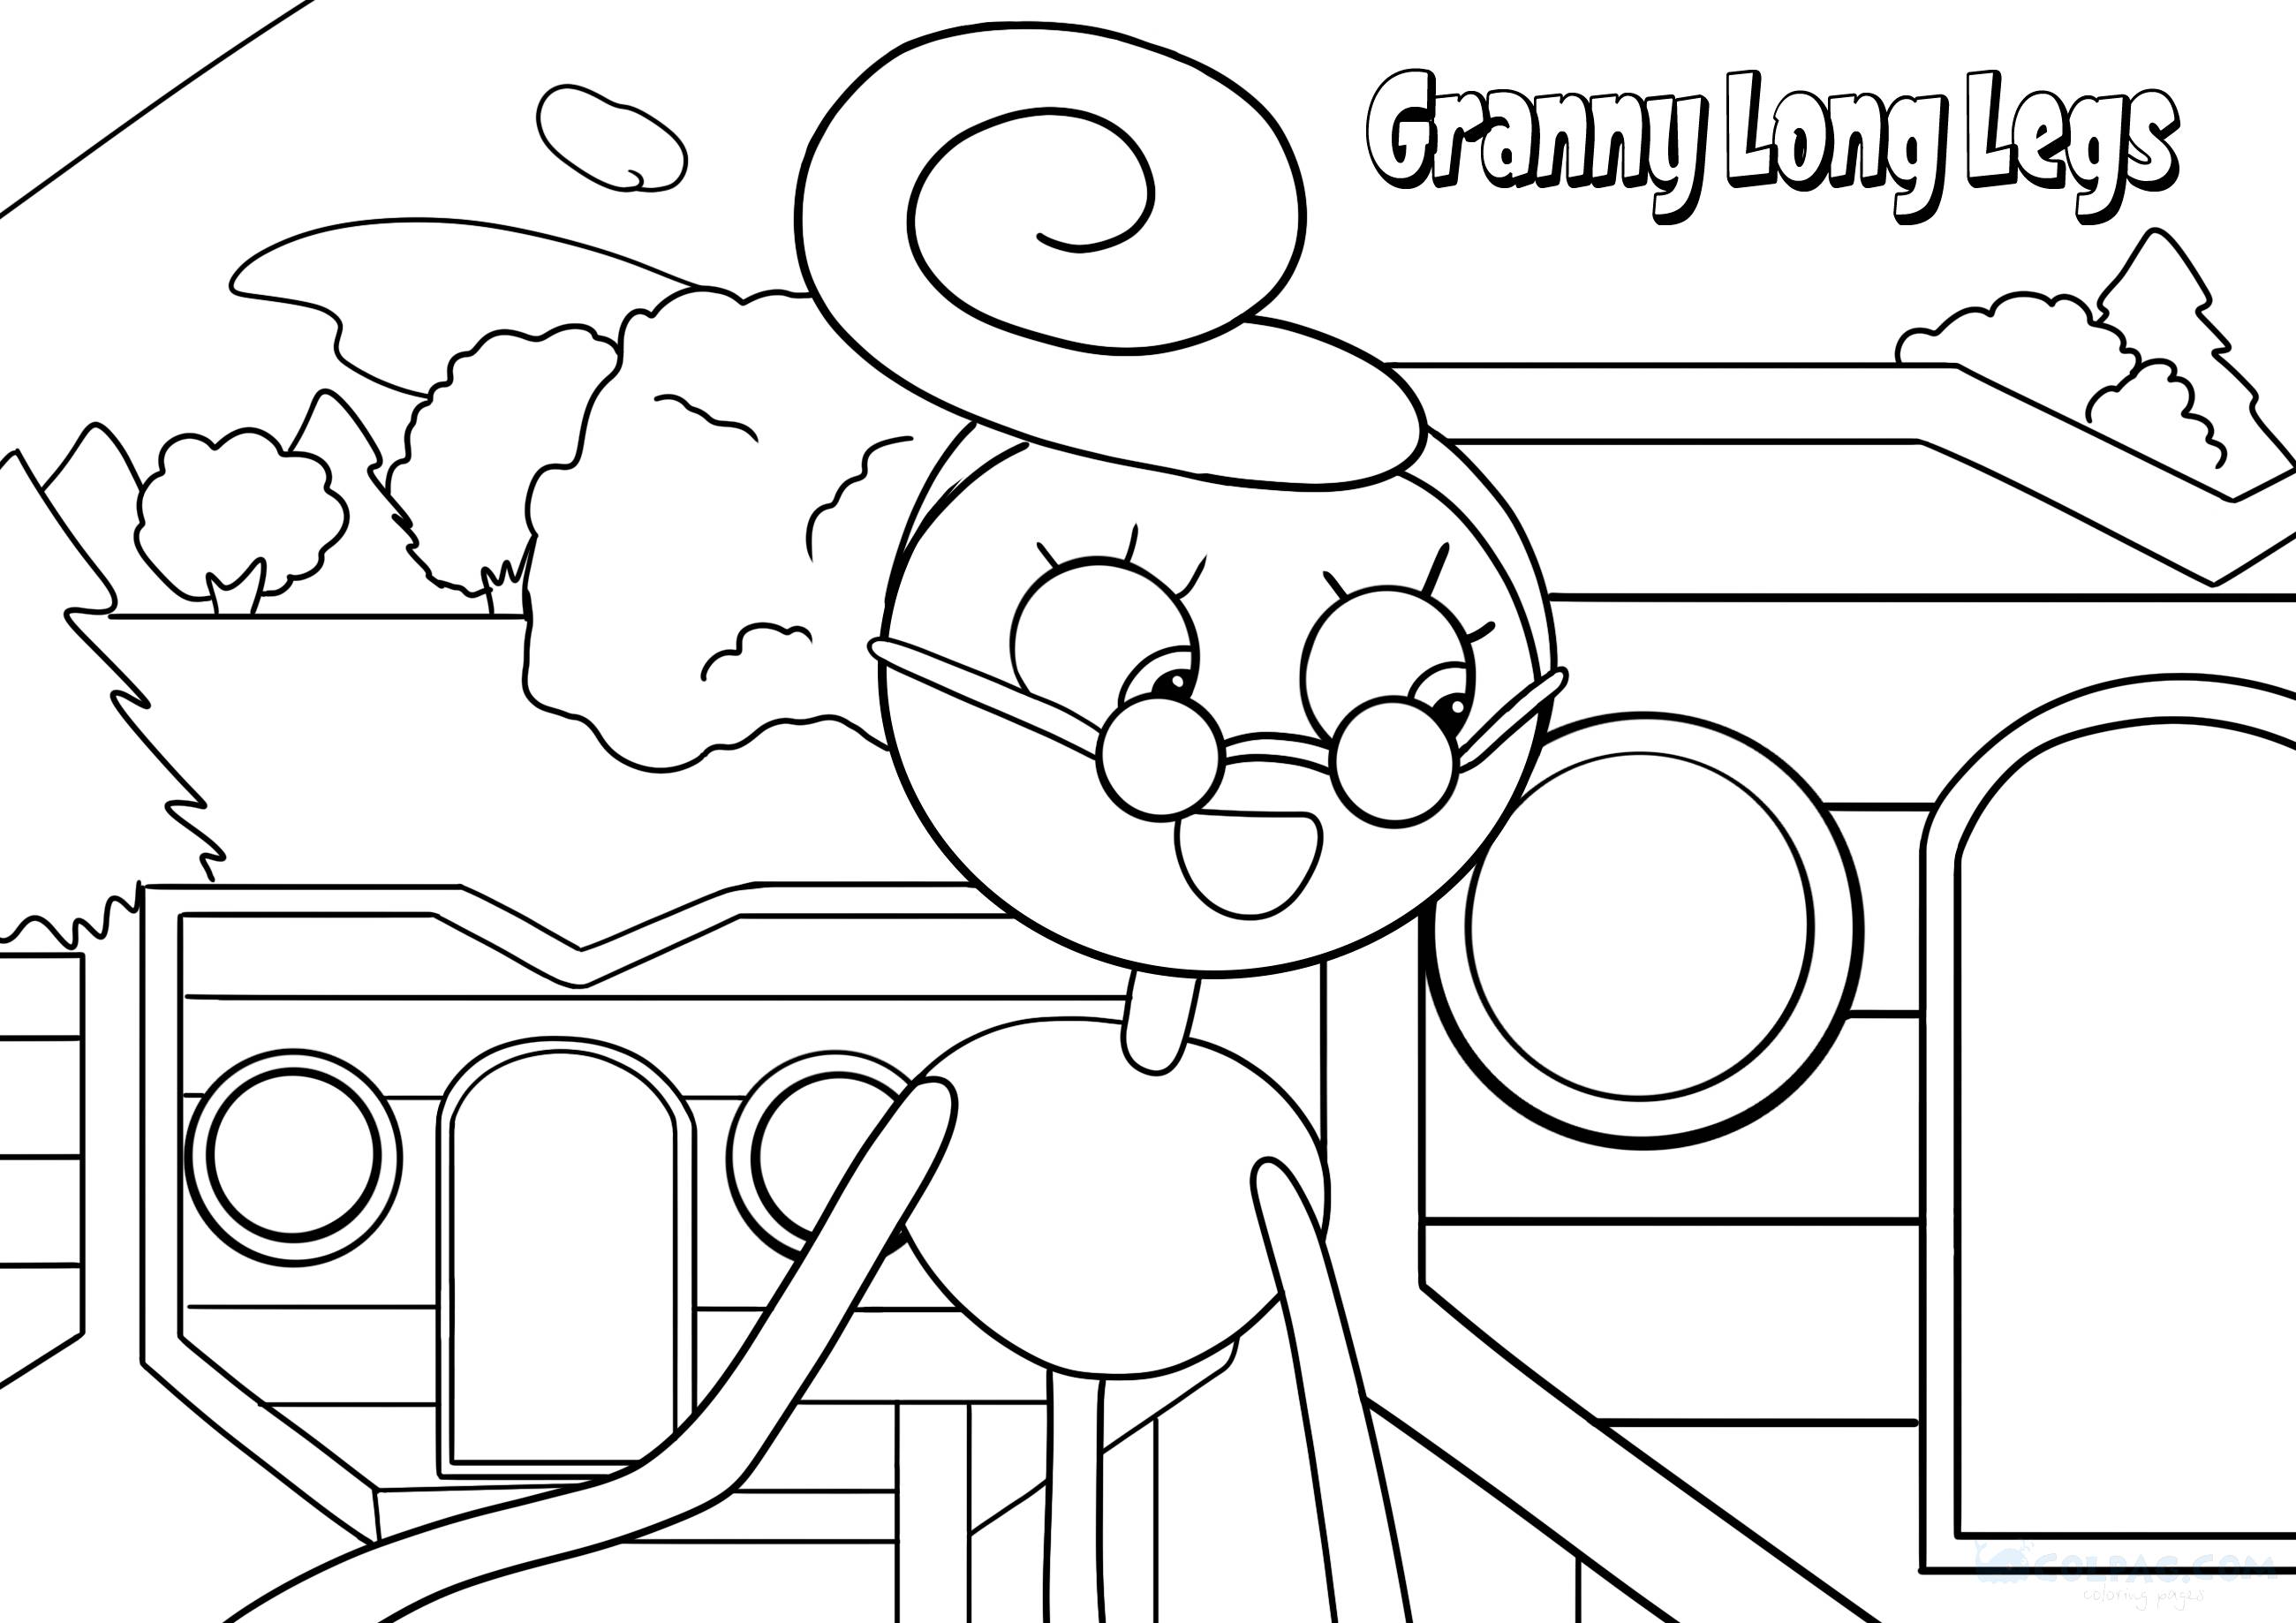 granny-long-legs-coloring-page-colpag-com-9